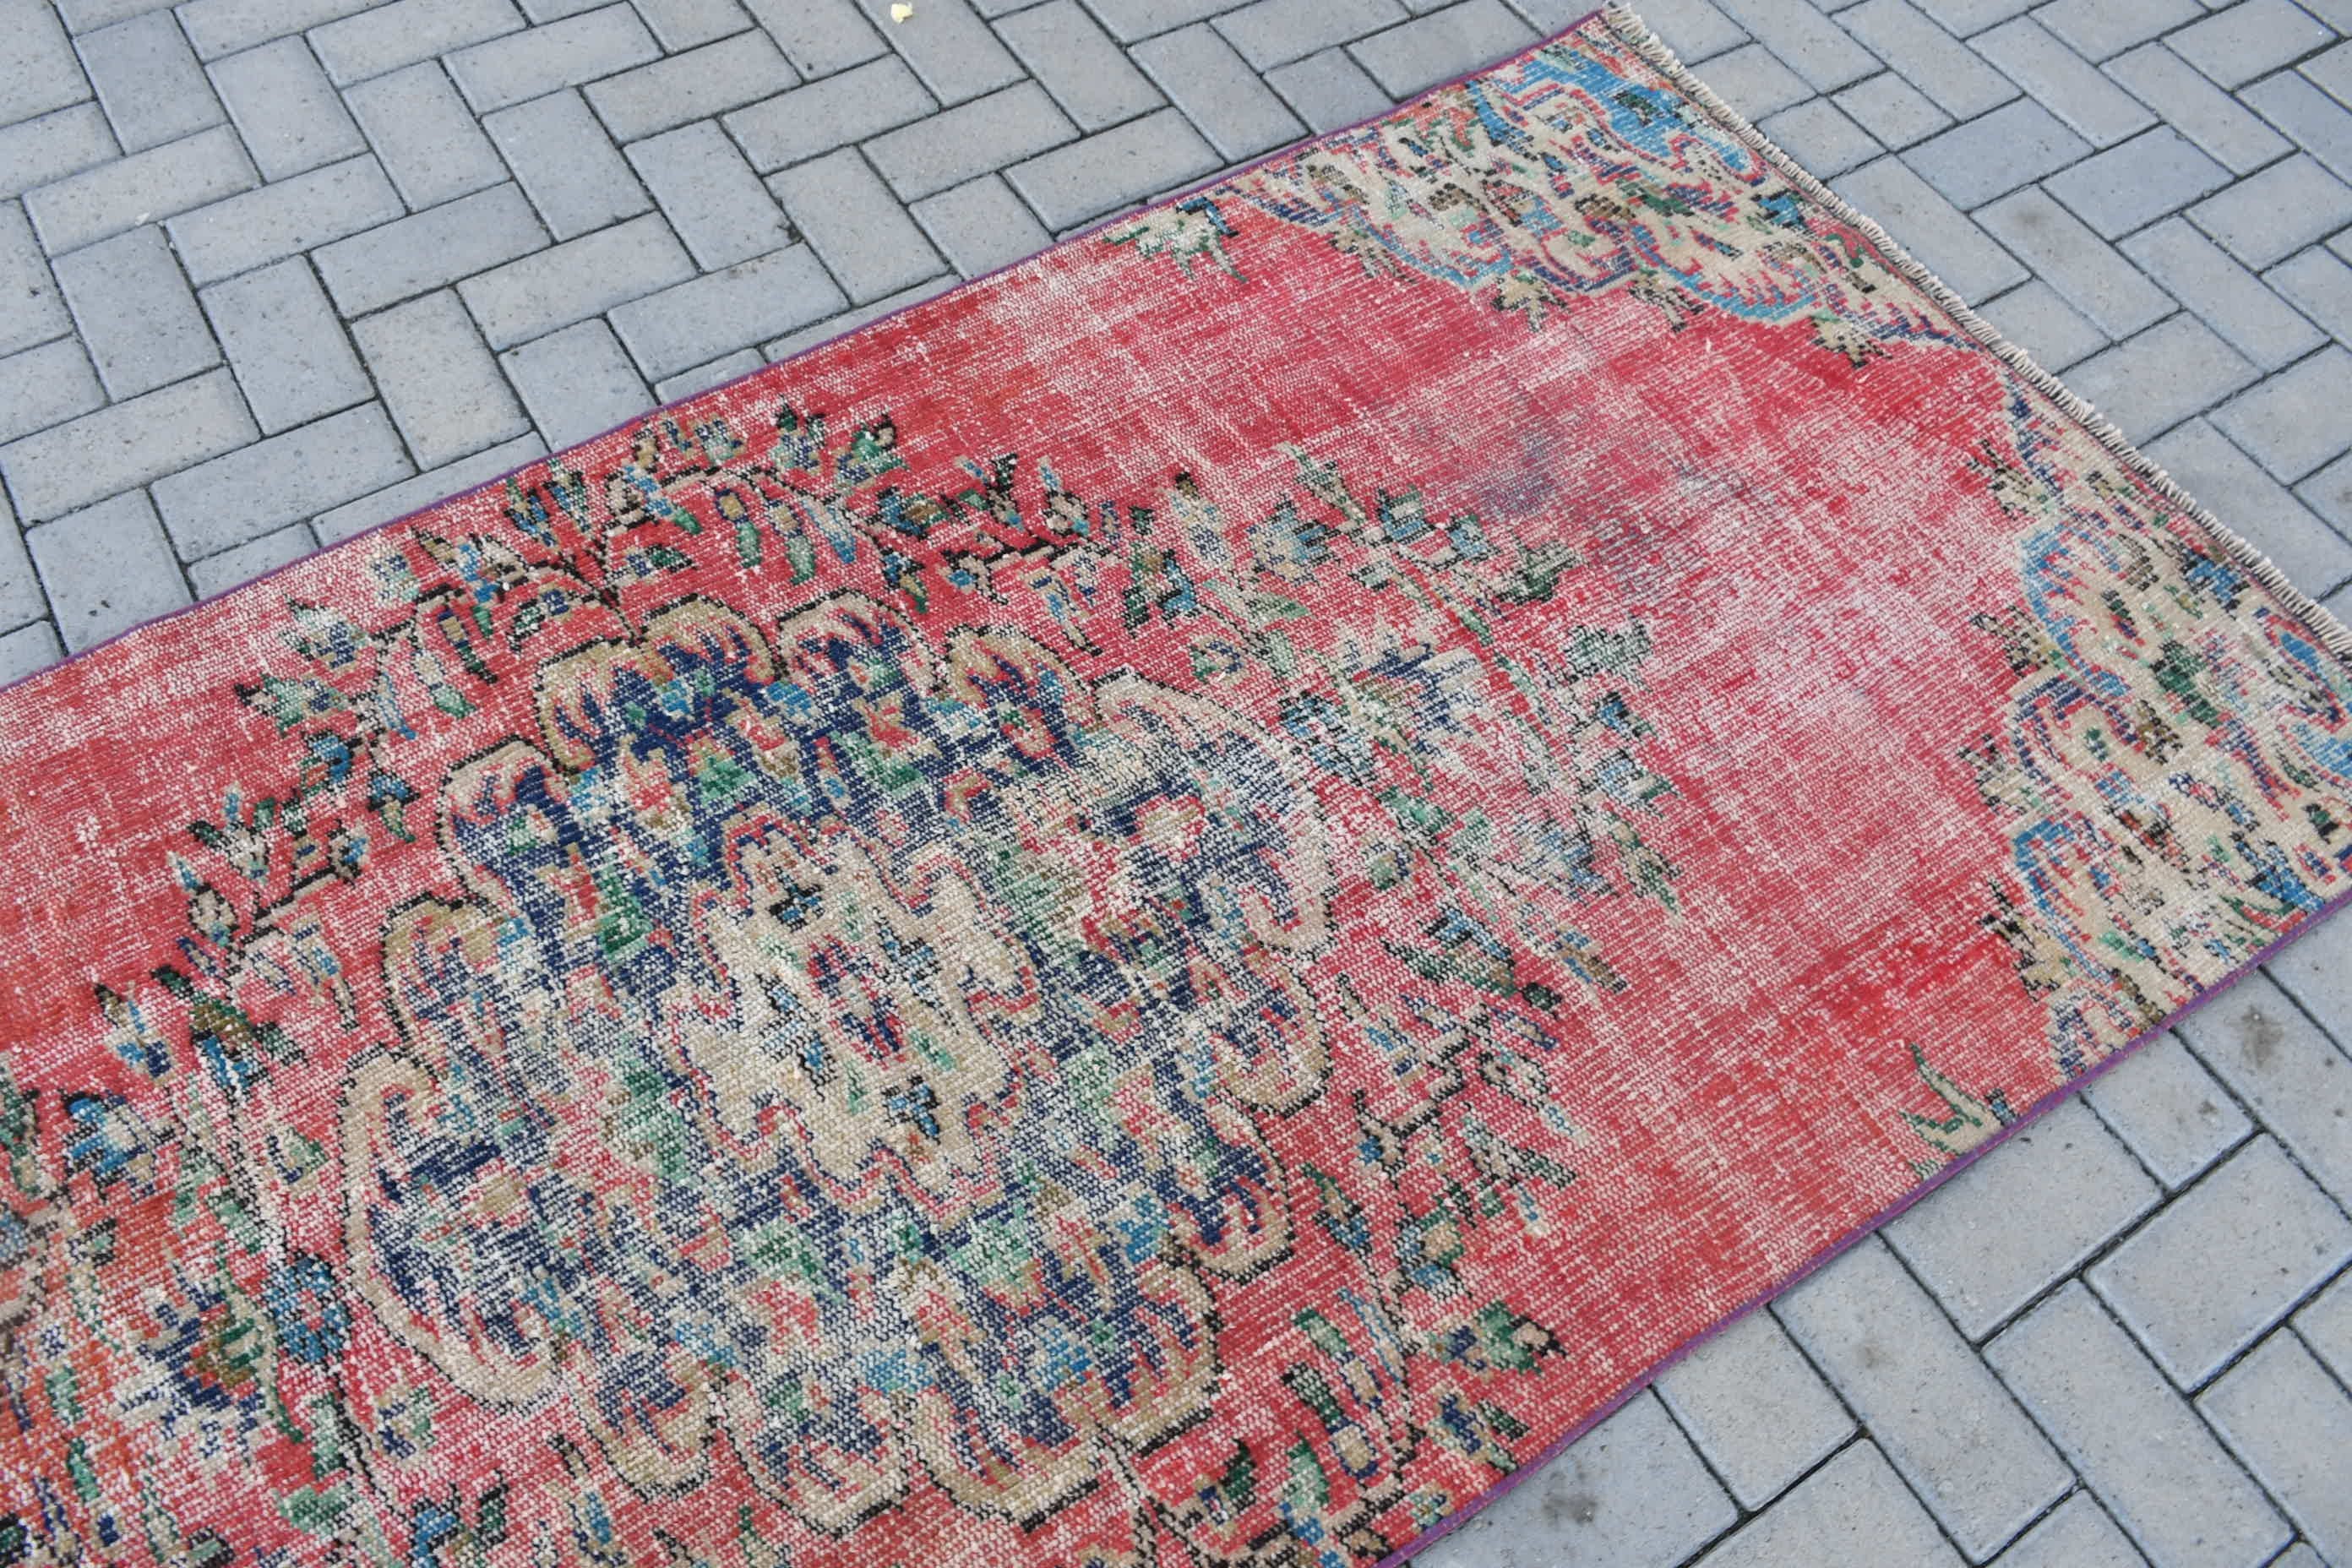 Vintage Decor Rugs, Antique Rug, 3.4x7.9 ft Area Rugs, Turkish Rug, Moroccan Rugs, Vintage Rug, Rugs for Area, Bedroom Rug, Red Cool Rug